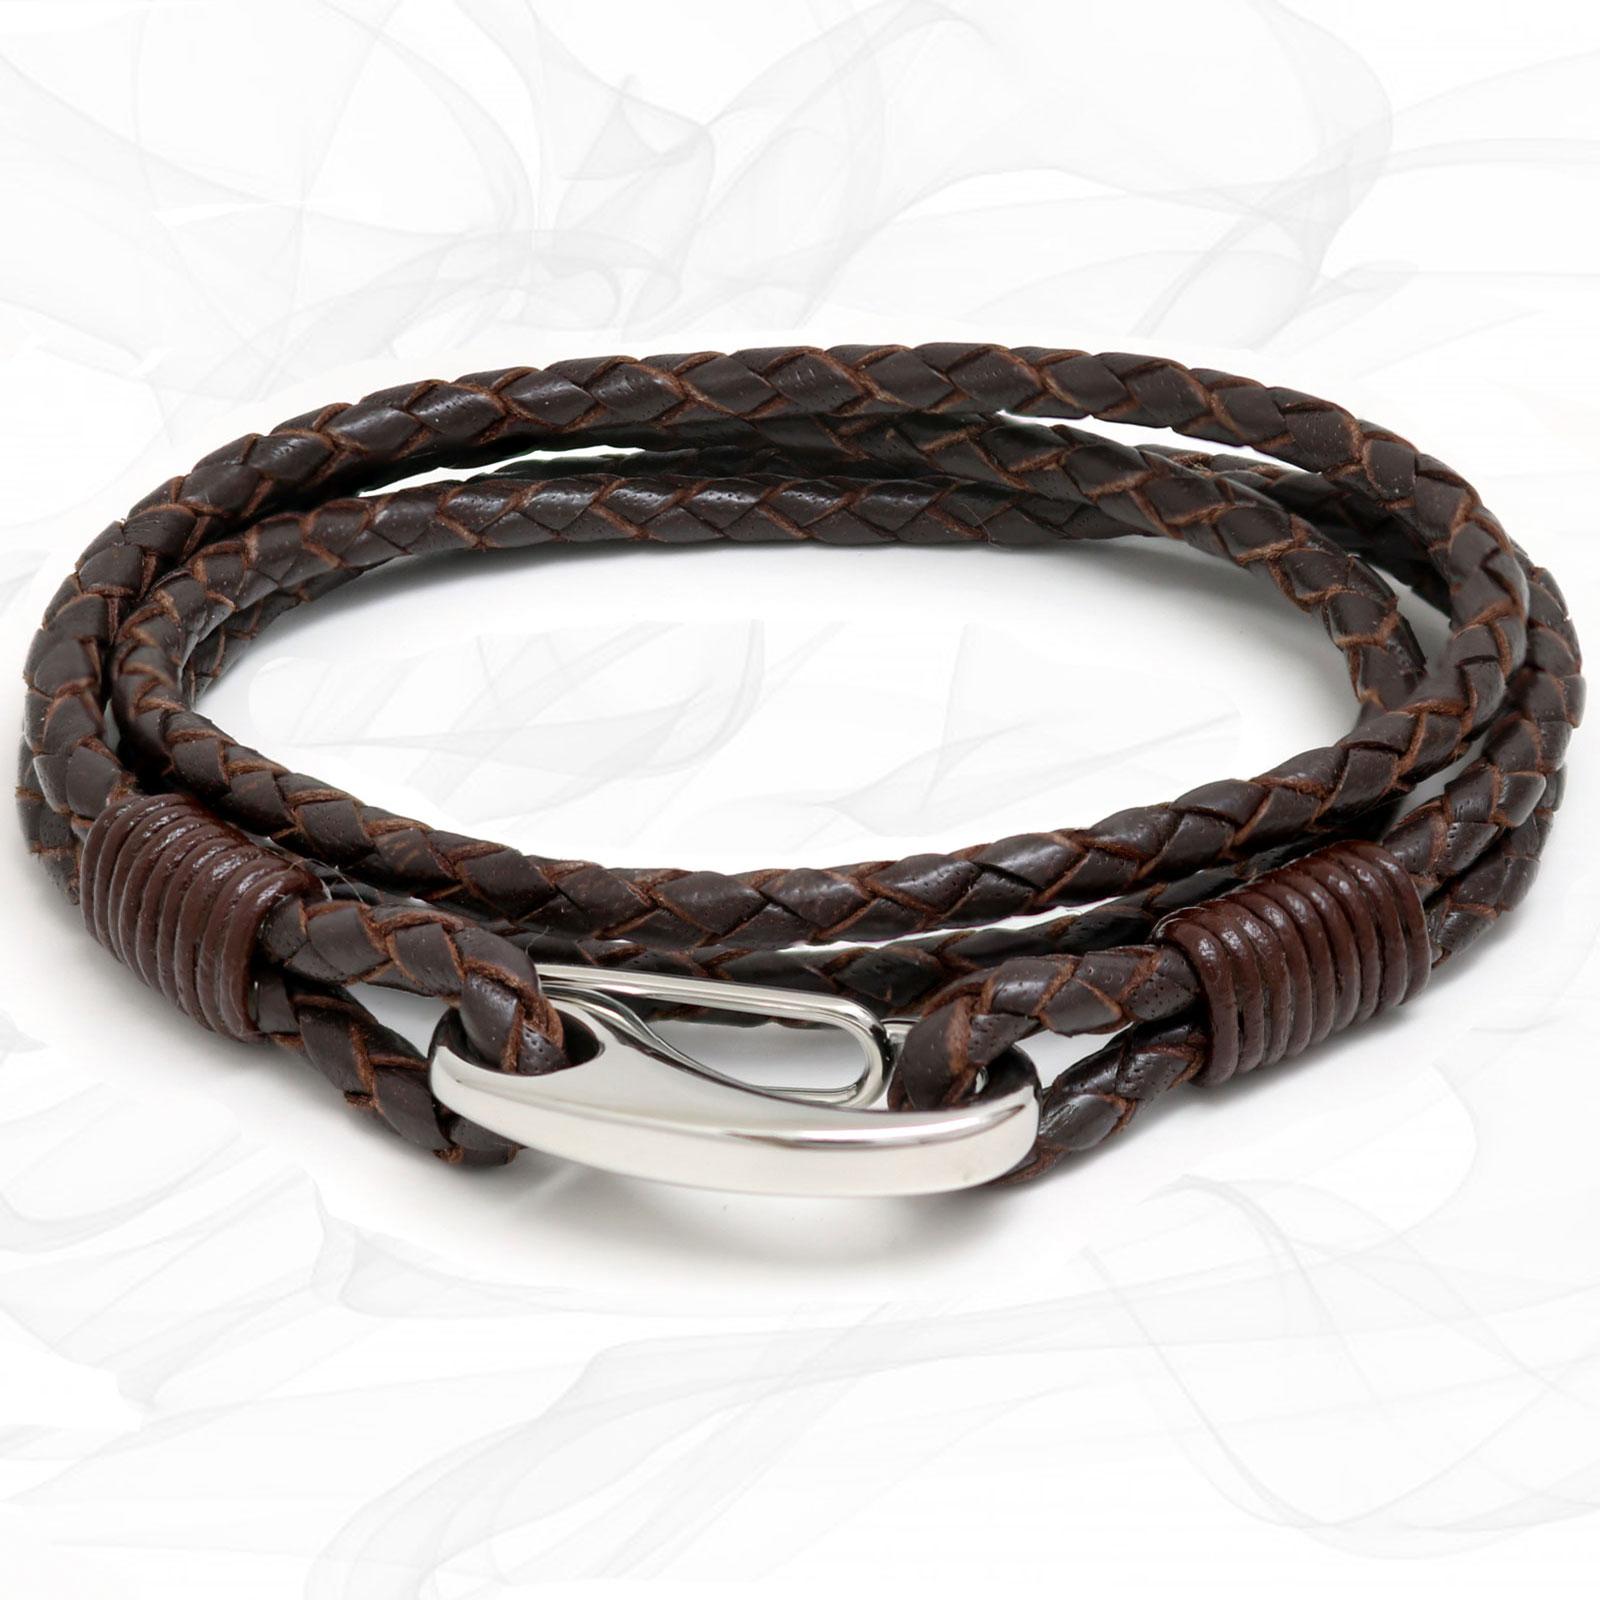 Brown Quad Wrap Bolo Leather Bracelet with Steel Lobster Clasp by Tribal Steel